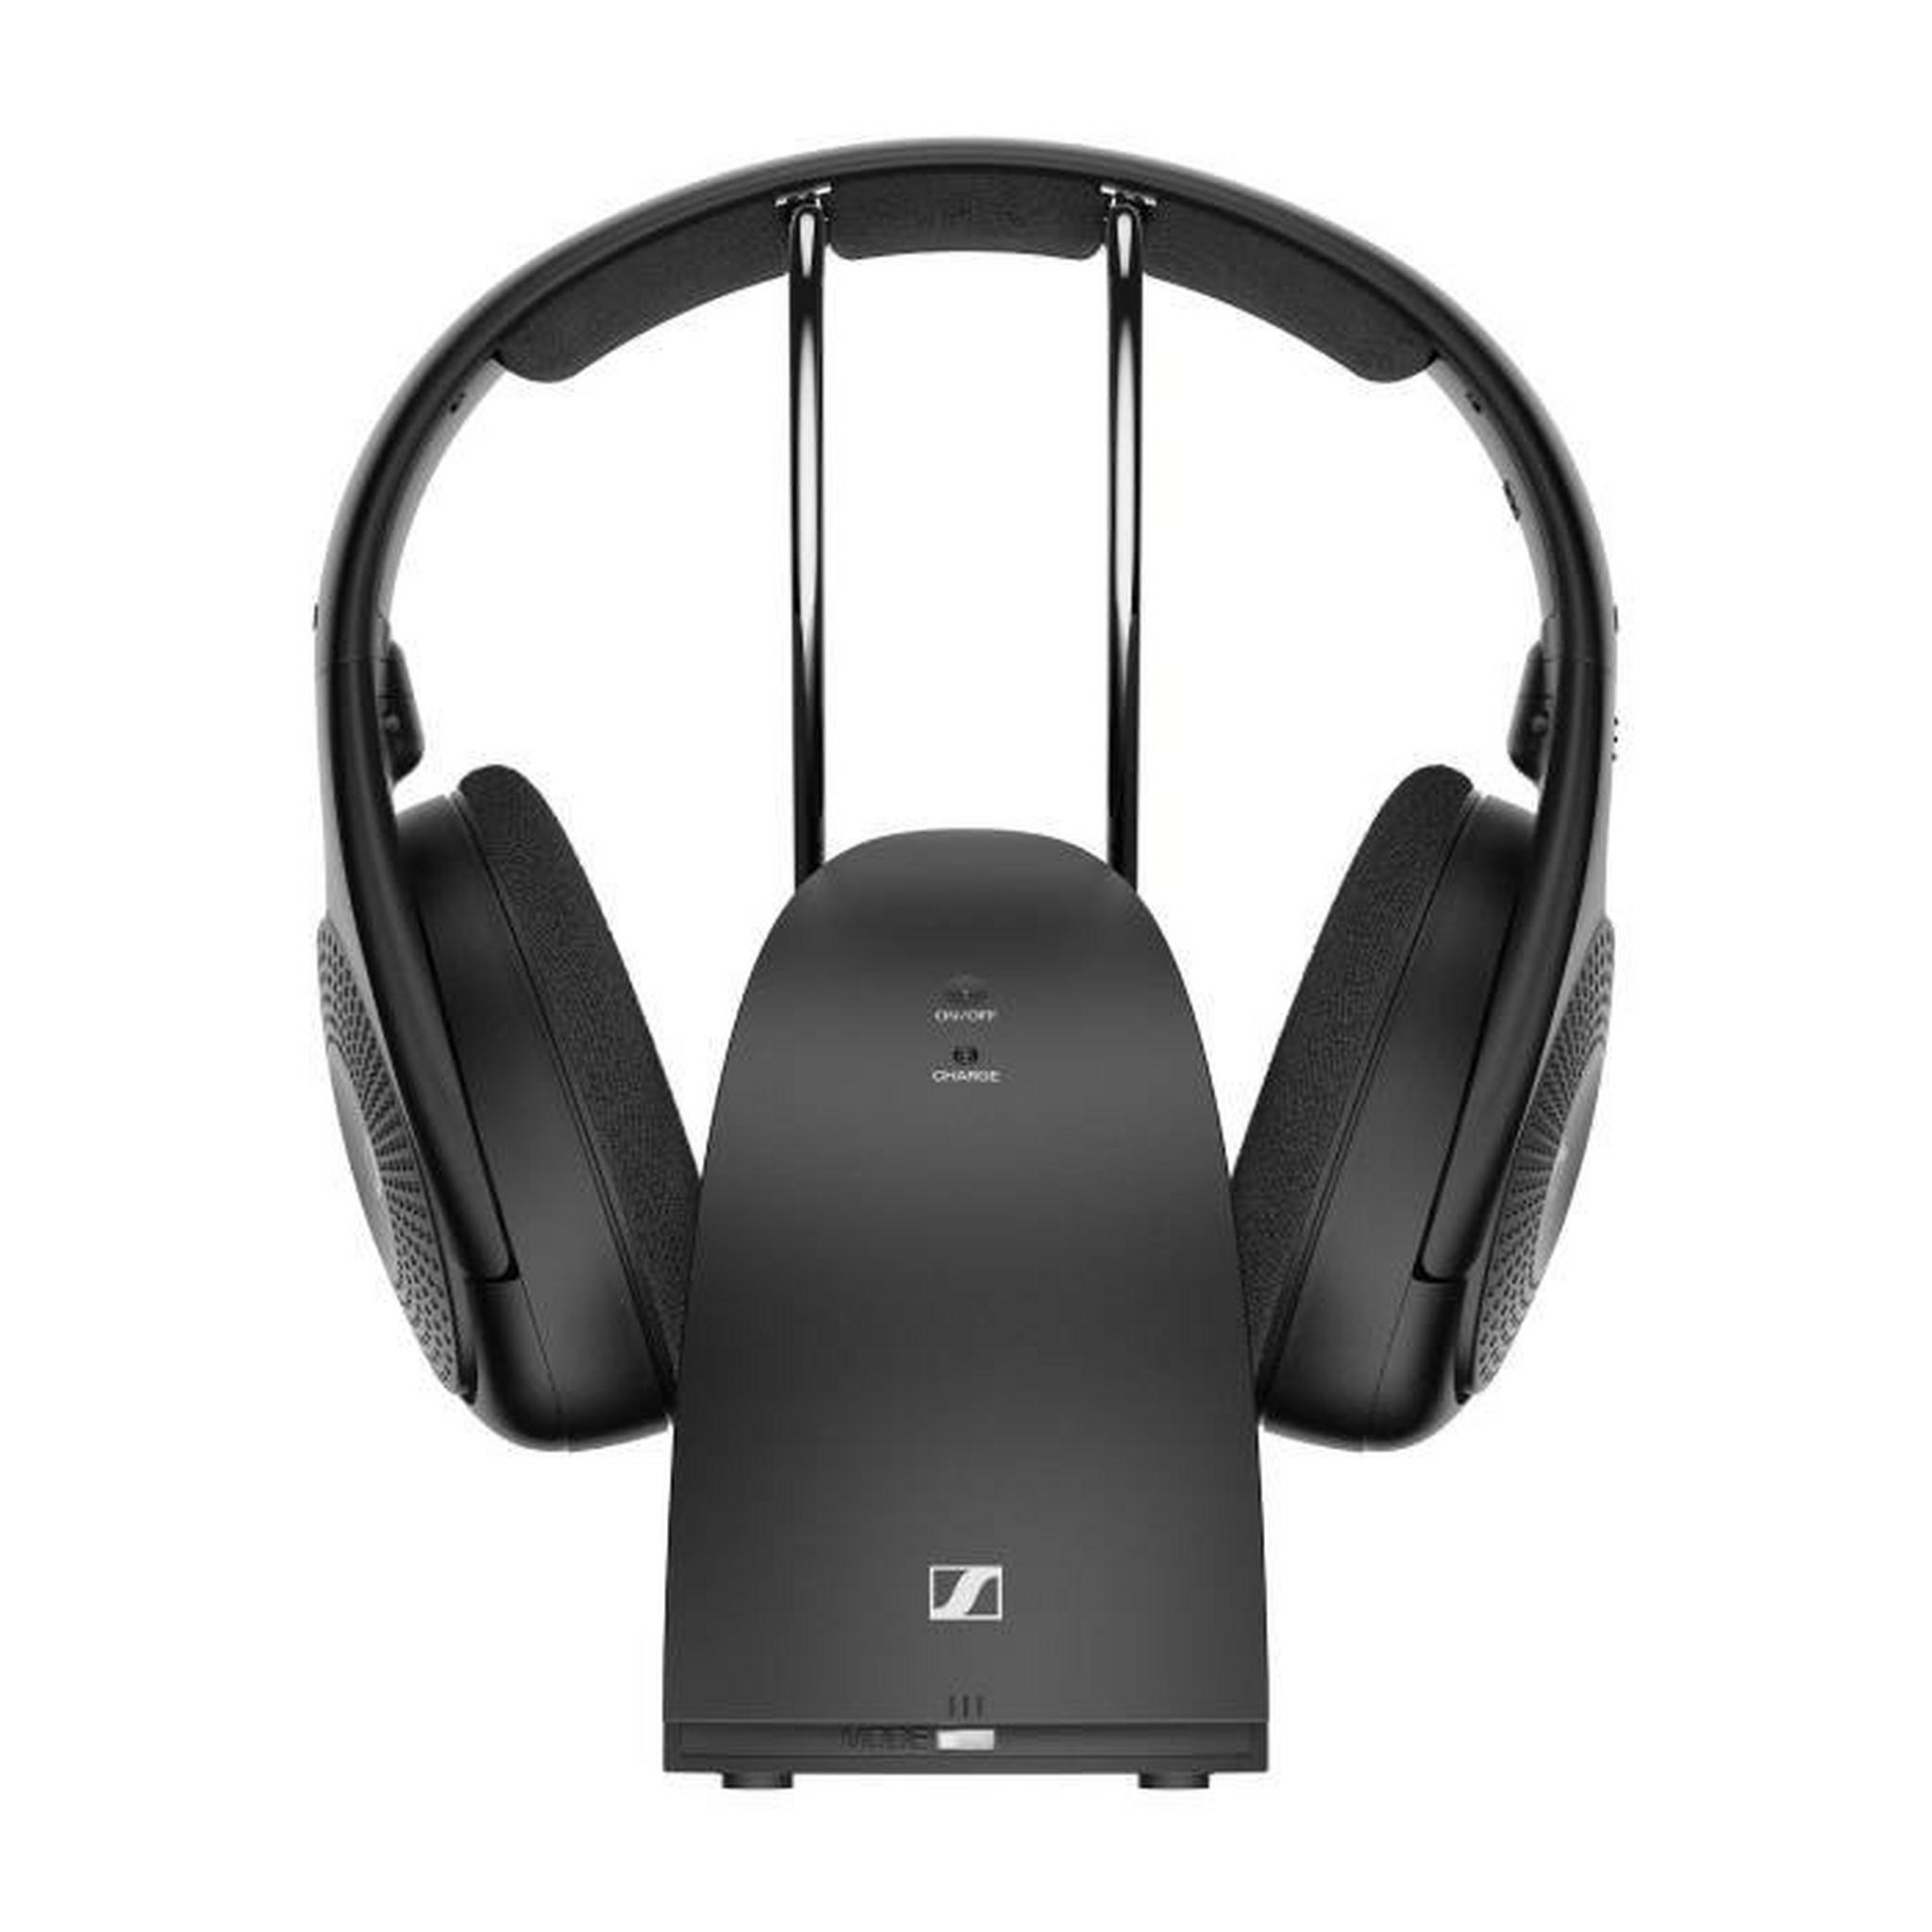 Sennheiser On-Ear Wireless Headphones for TV Listening, with Transmitter, Docking Station, and  Charger, RS 12-0-W - Black